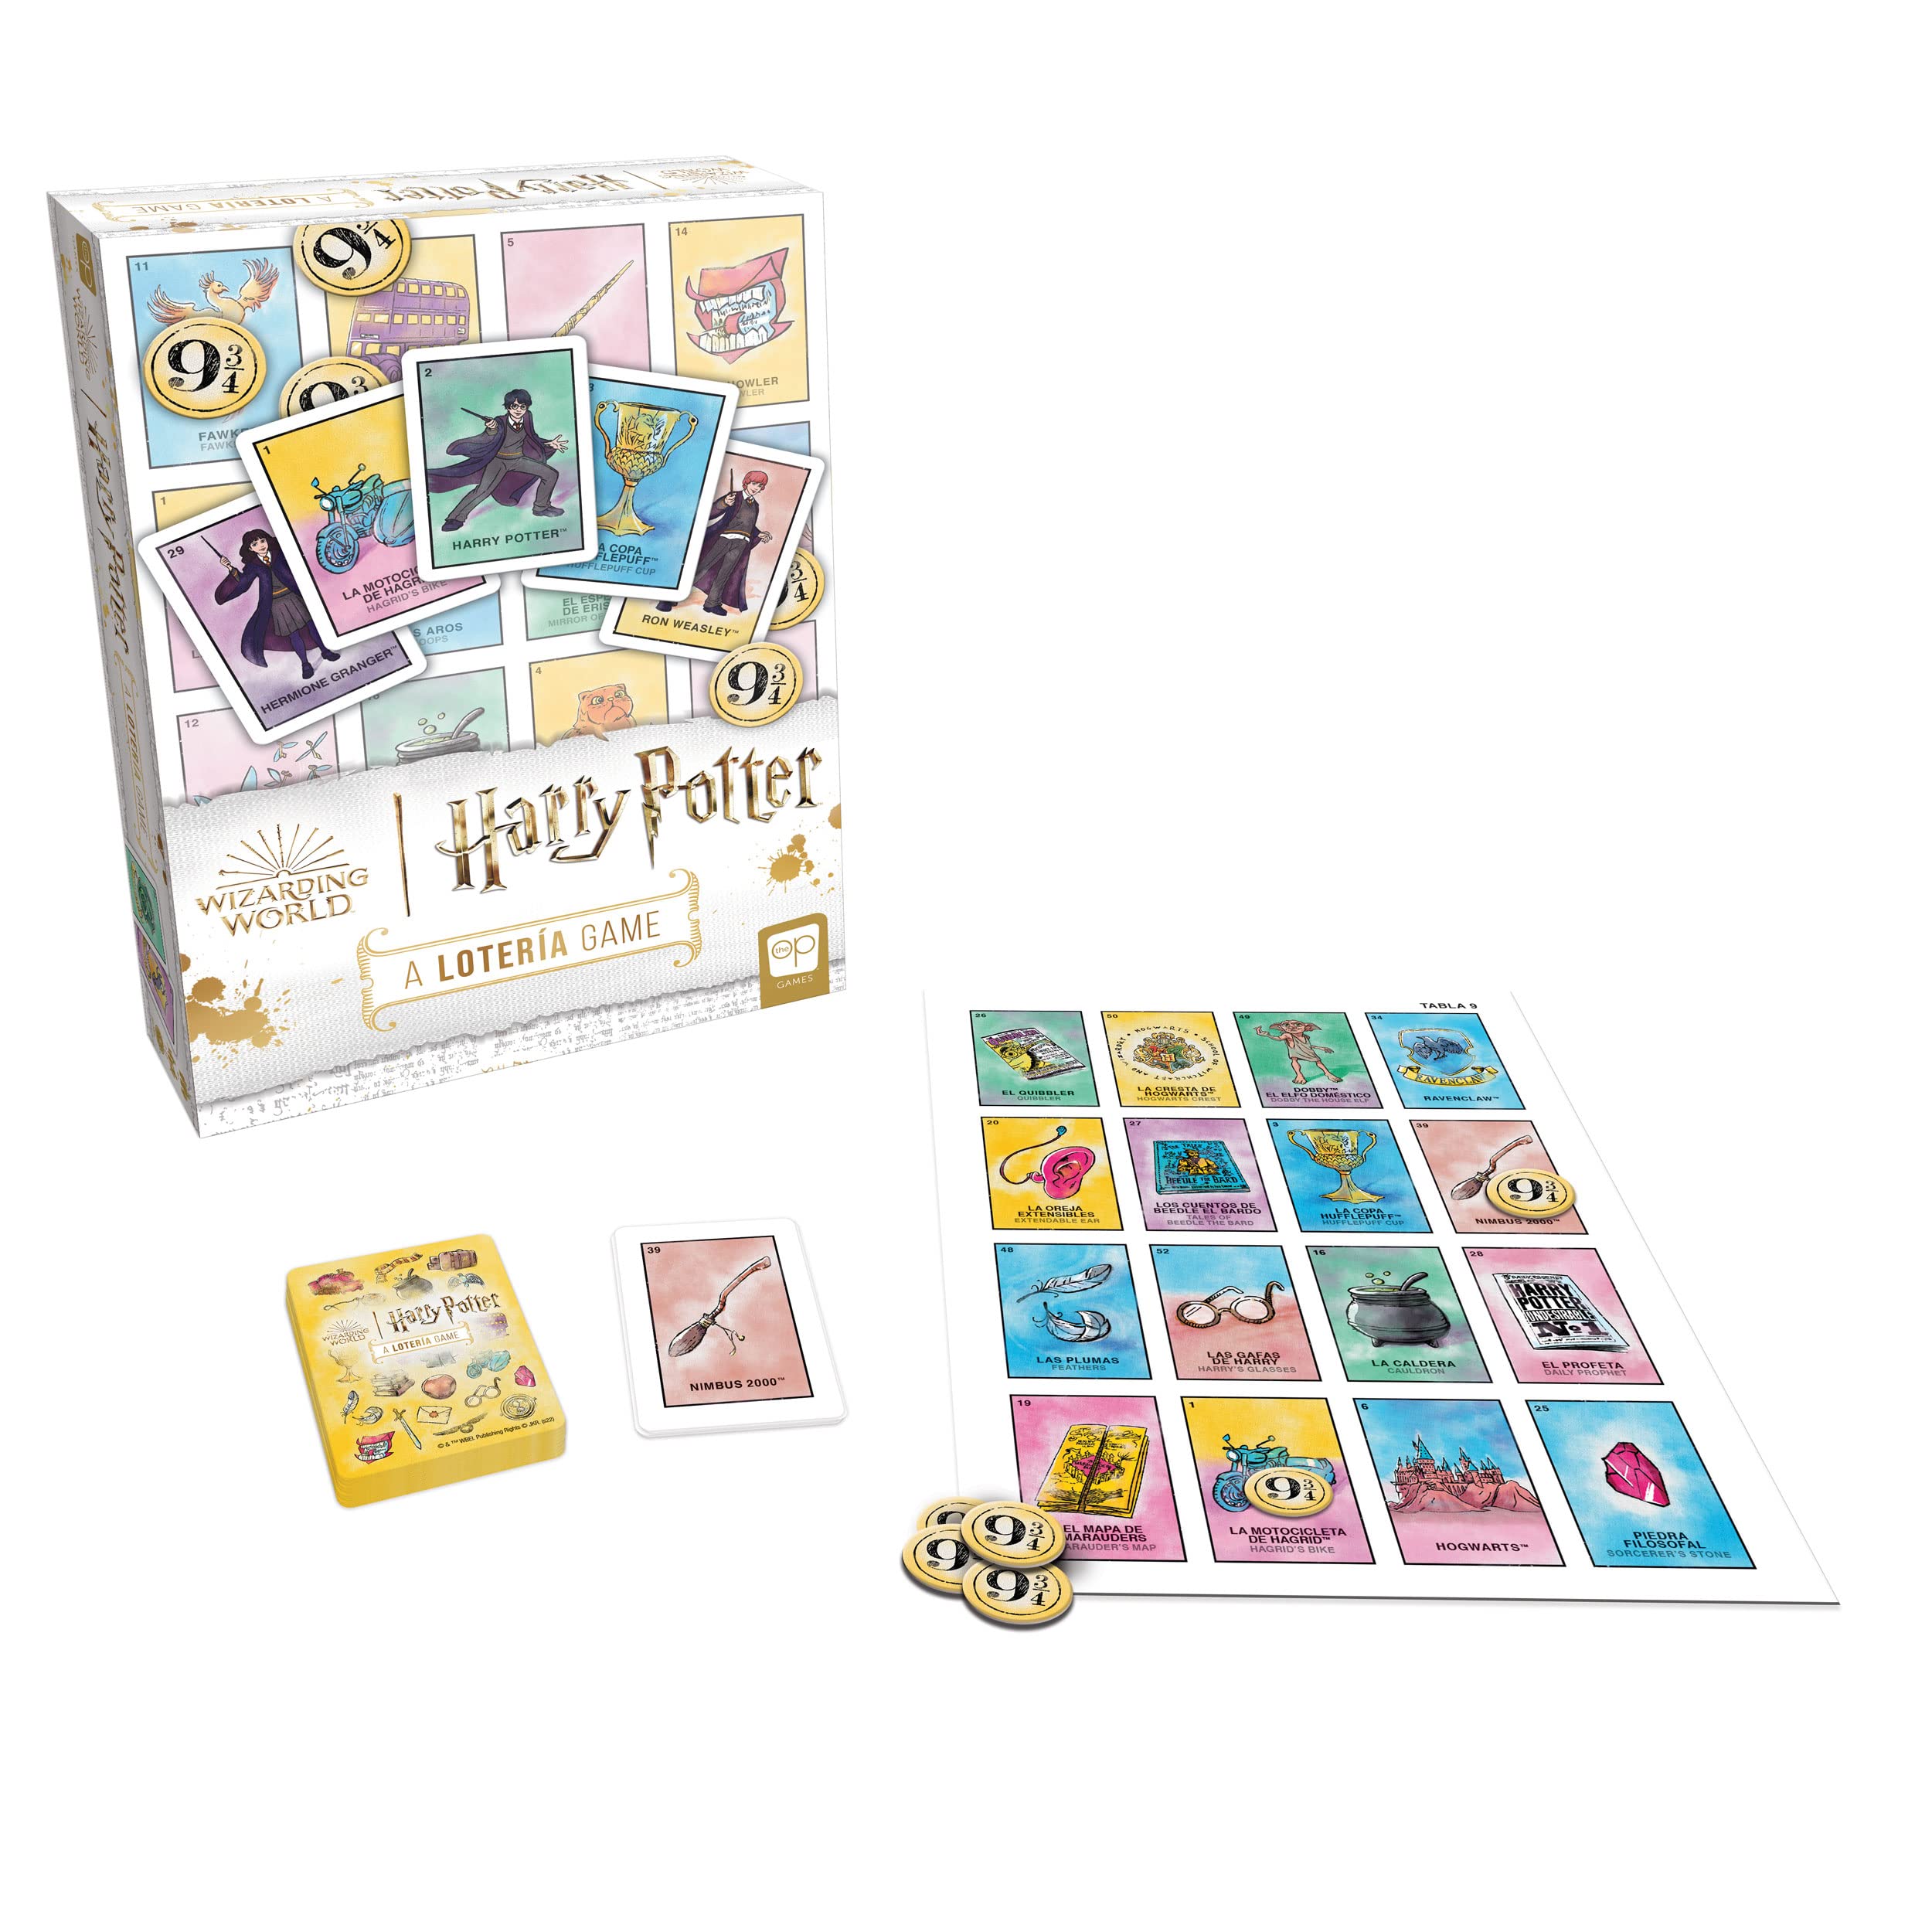 Harry Potter Loteria | Traditional Loteria Mexicana Game of Chance | Bingo Style Game Featuring Custom Artwork & Illustrations from Harry Potter Films | Inspired by Spanish Words & Mexican Culture